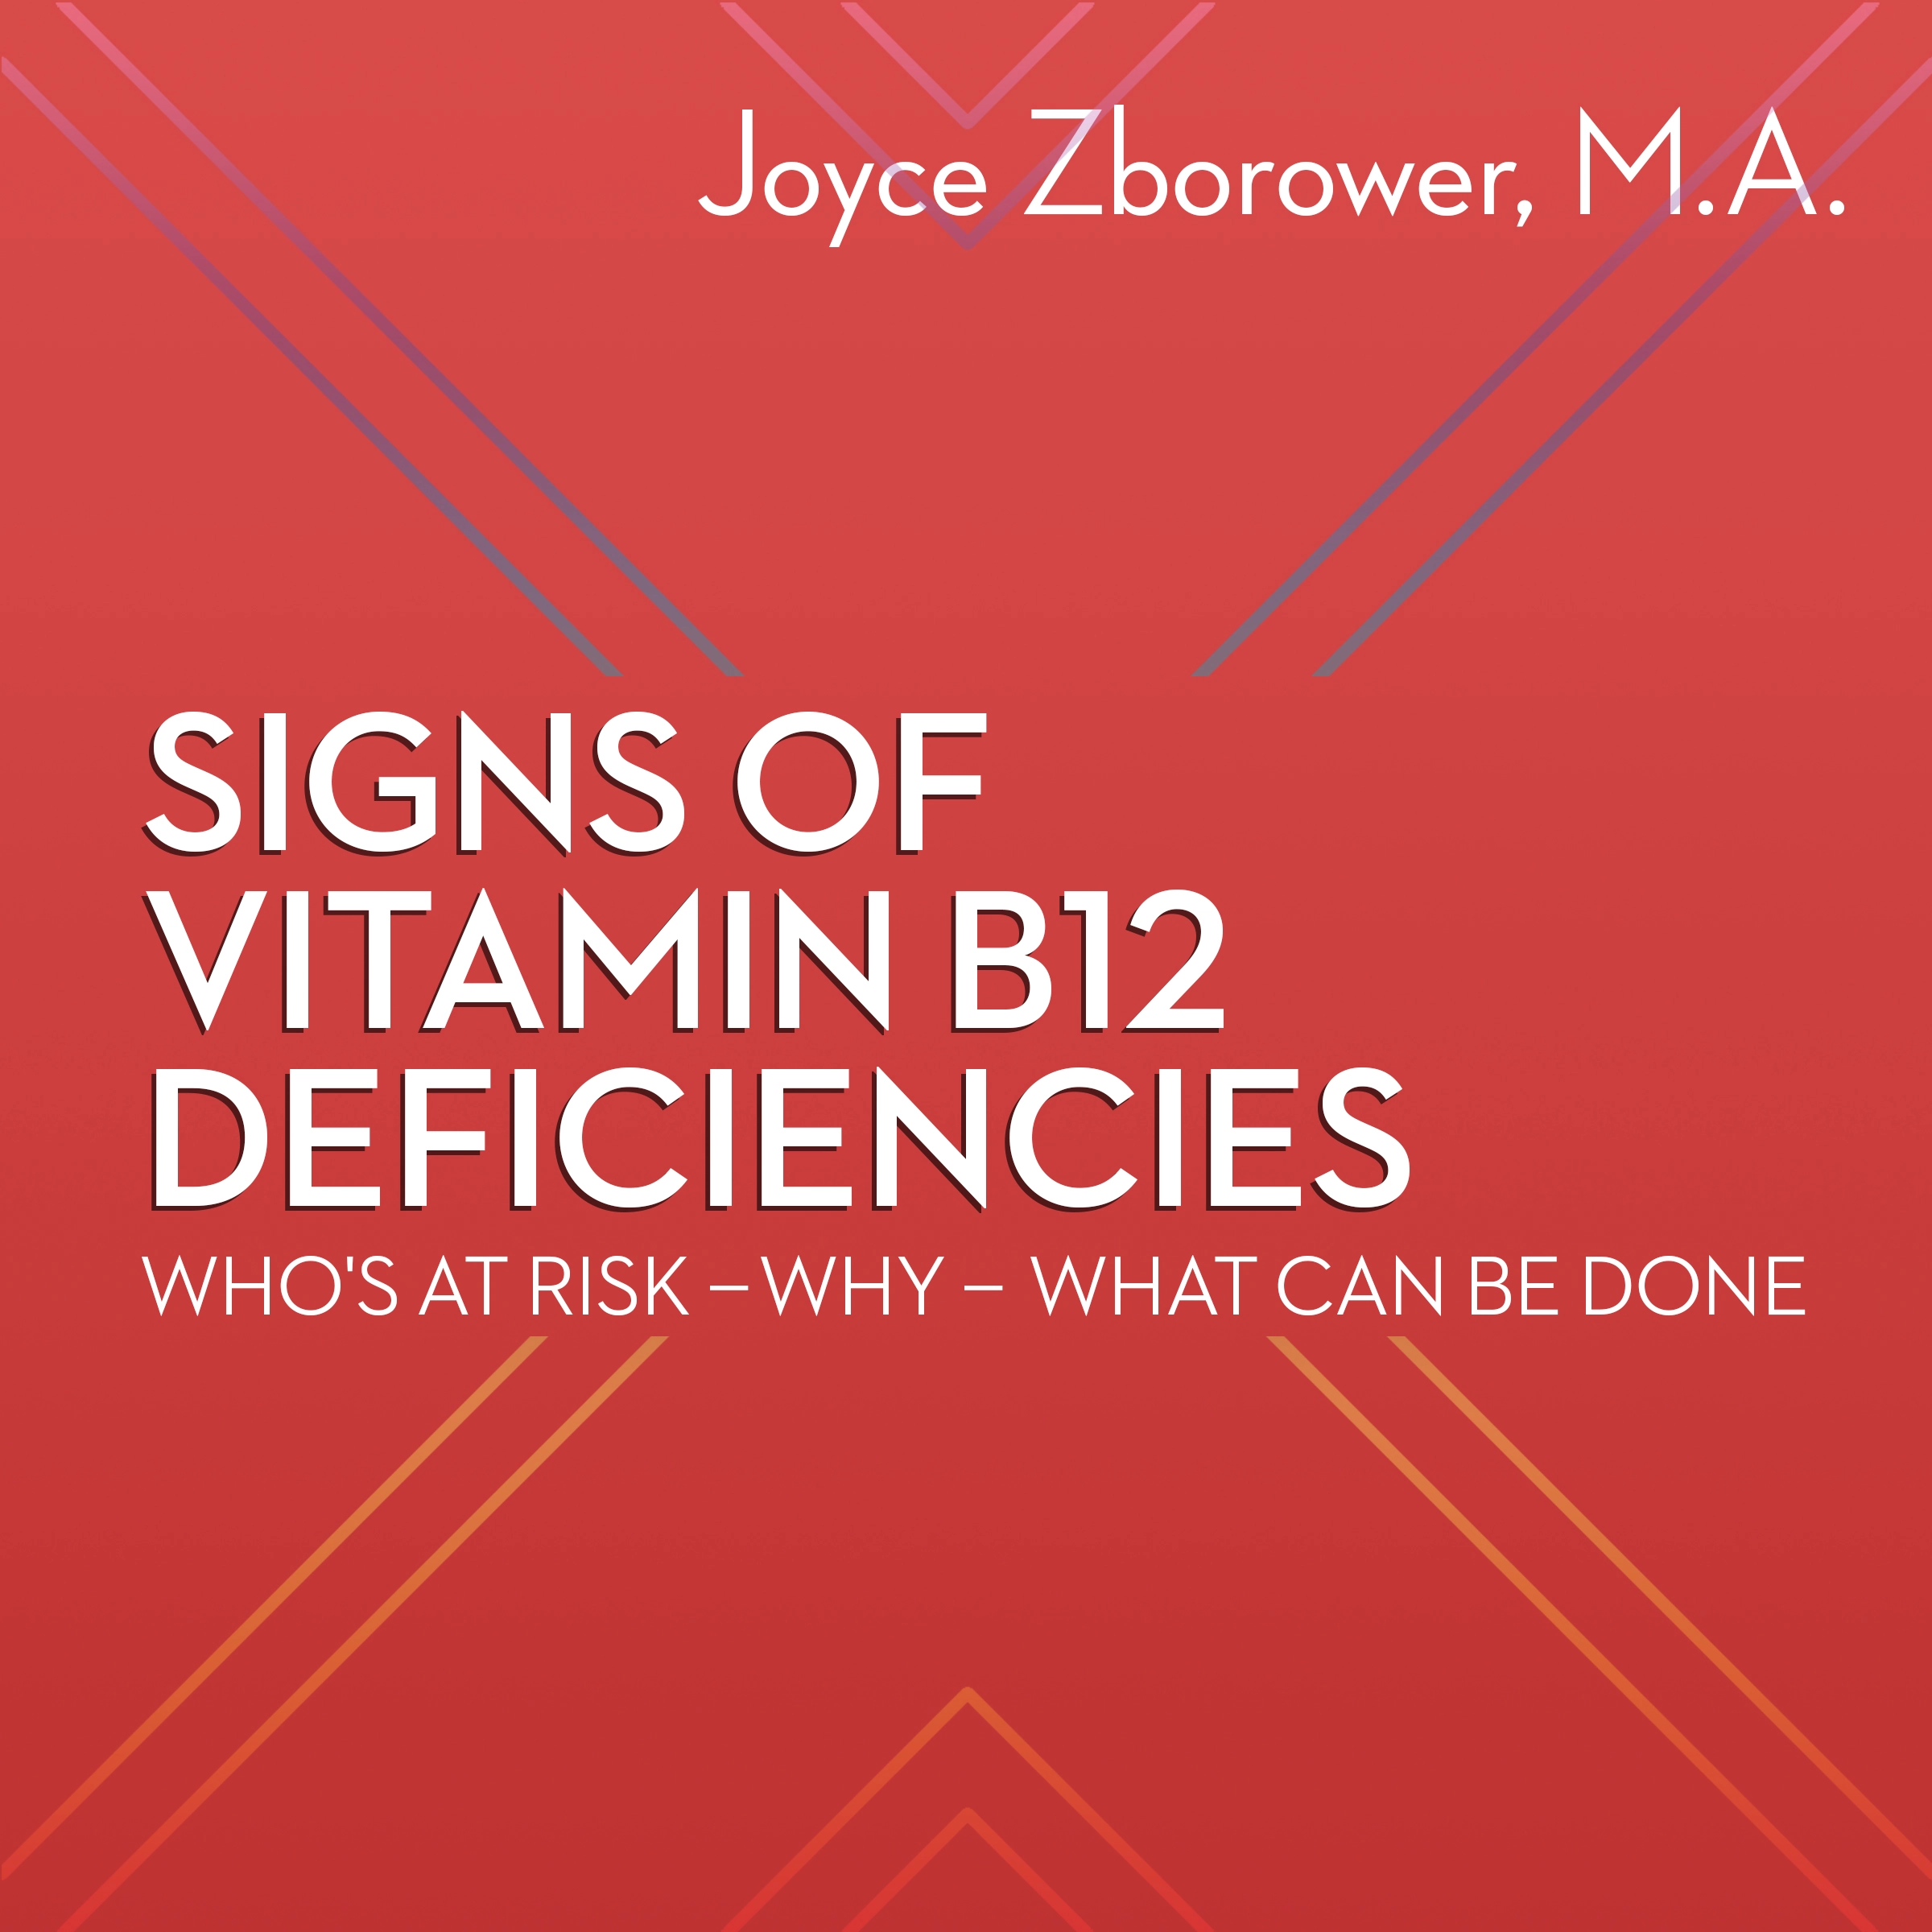 Signs of Vitamin B12 Deficiencies -- Who's At Risk - Why - What Can Be Done Audiobook by M.A.